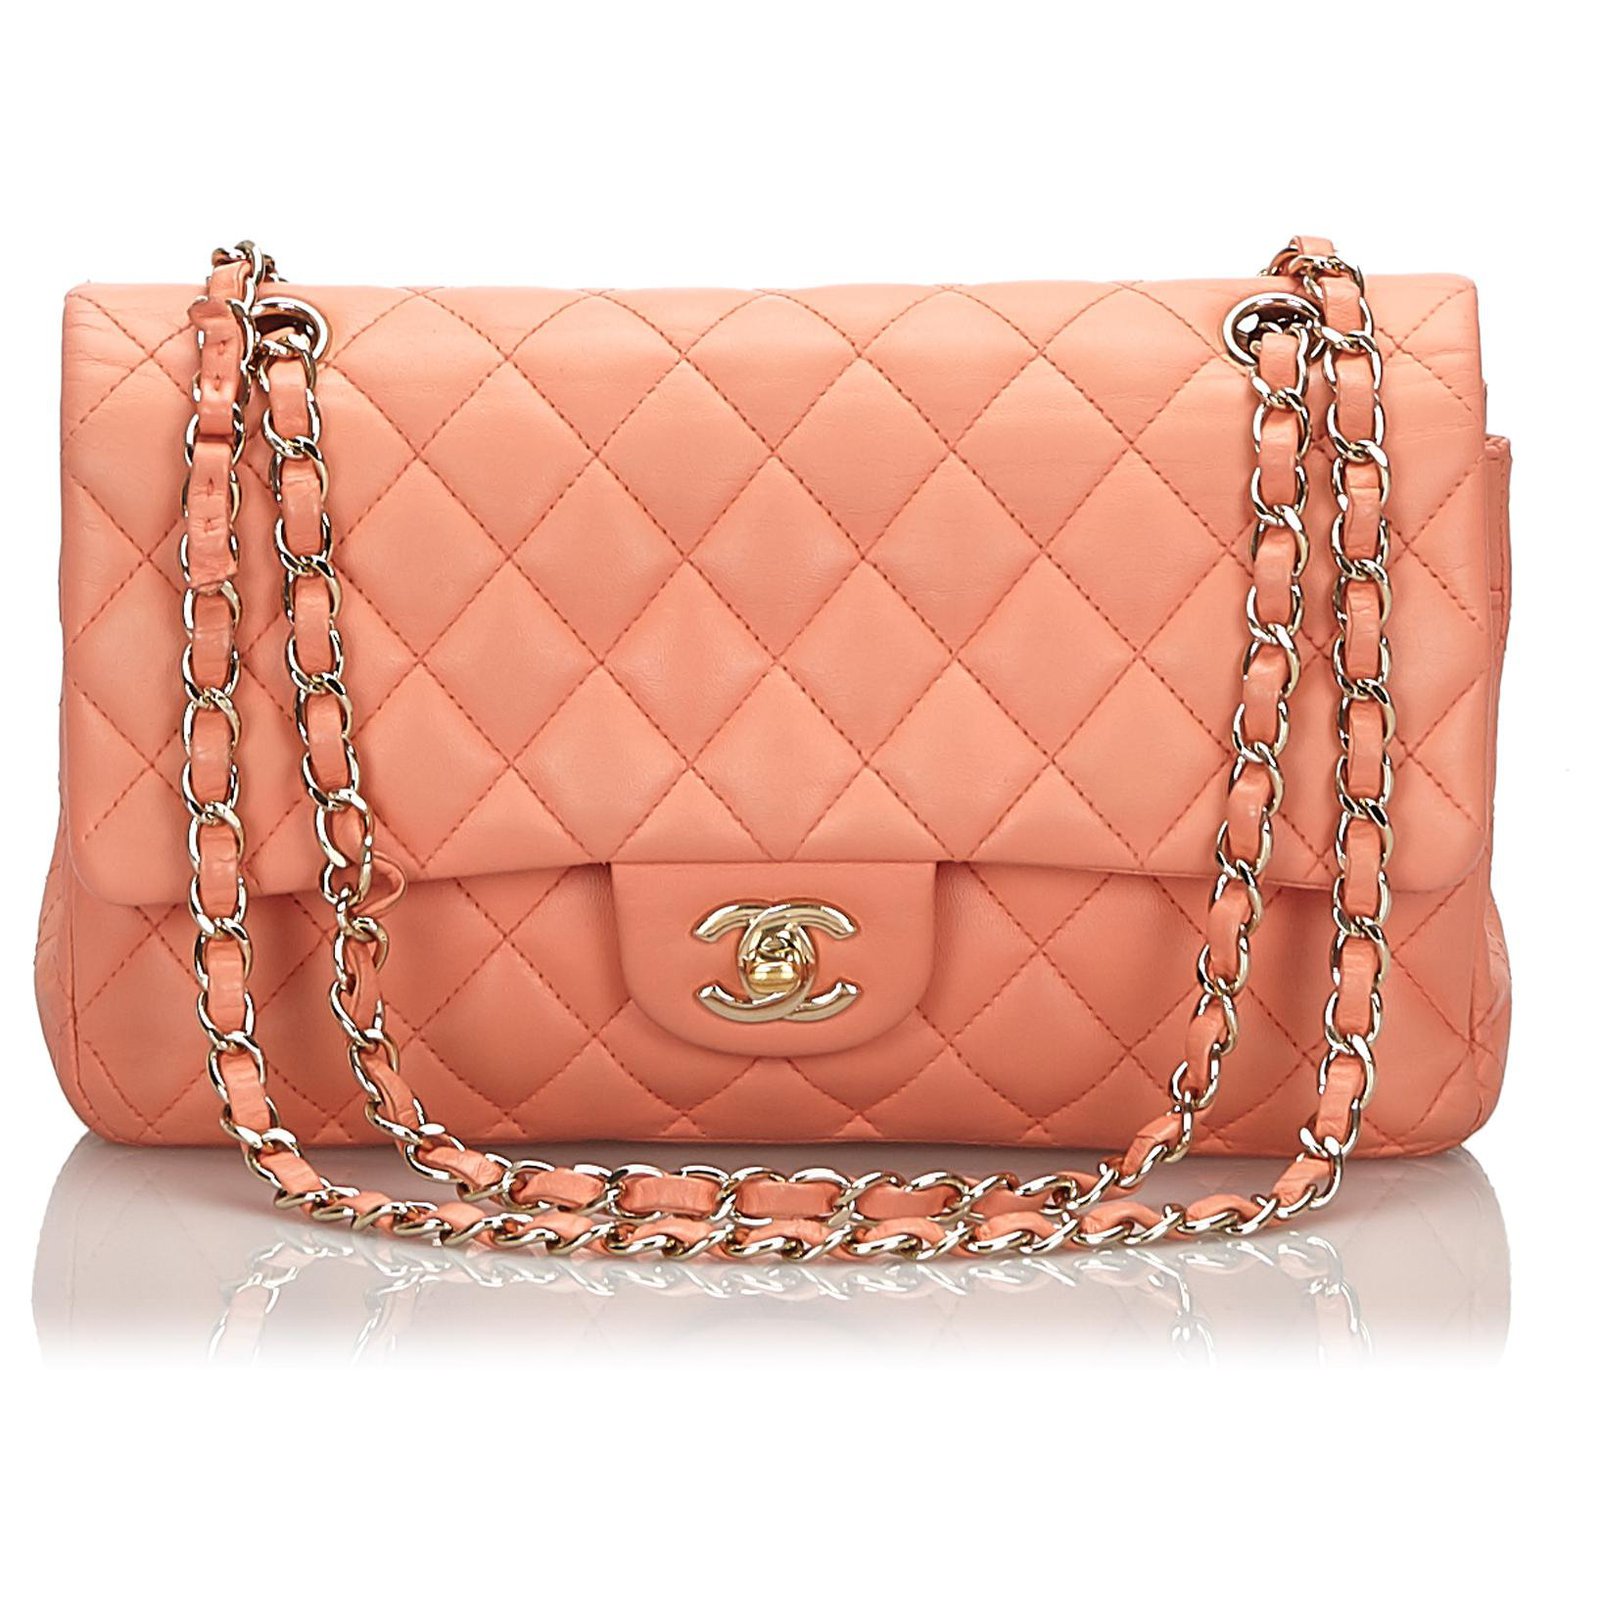 Timeless/classique leather crossbody bag Chanel Orange in Leather